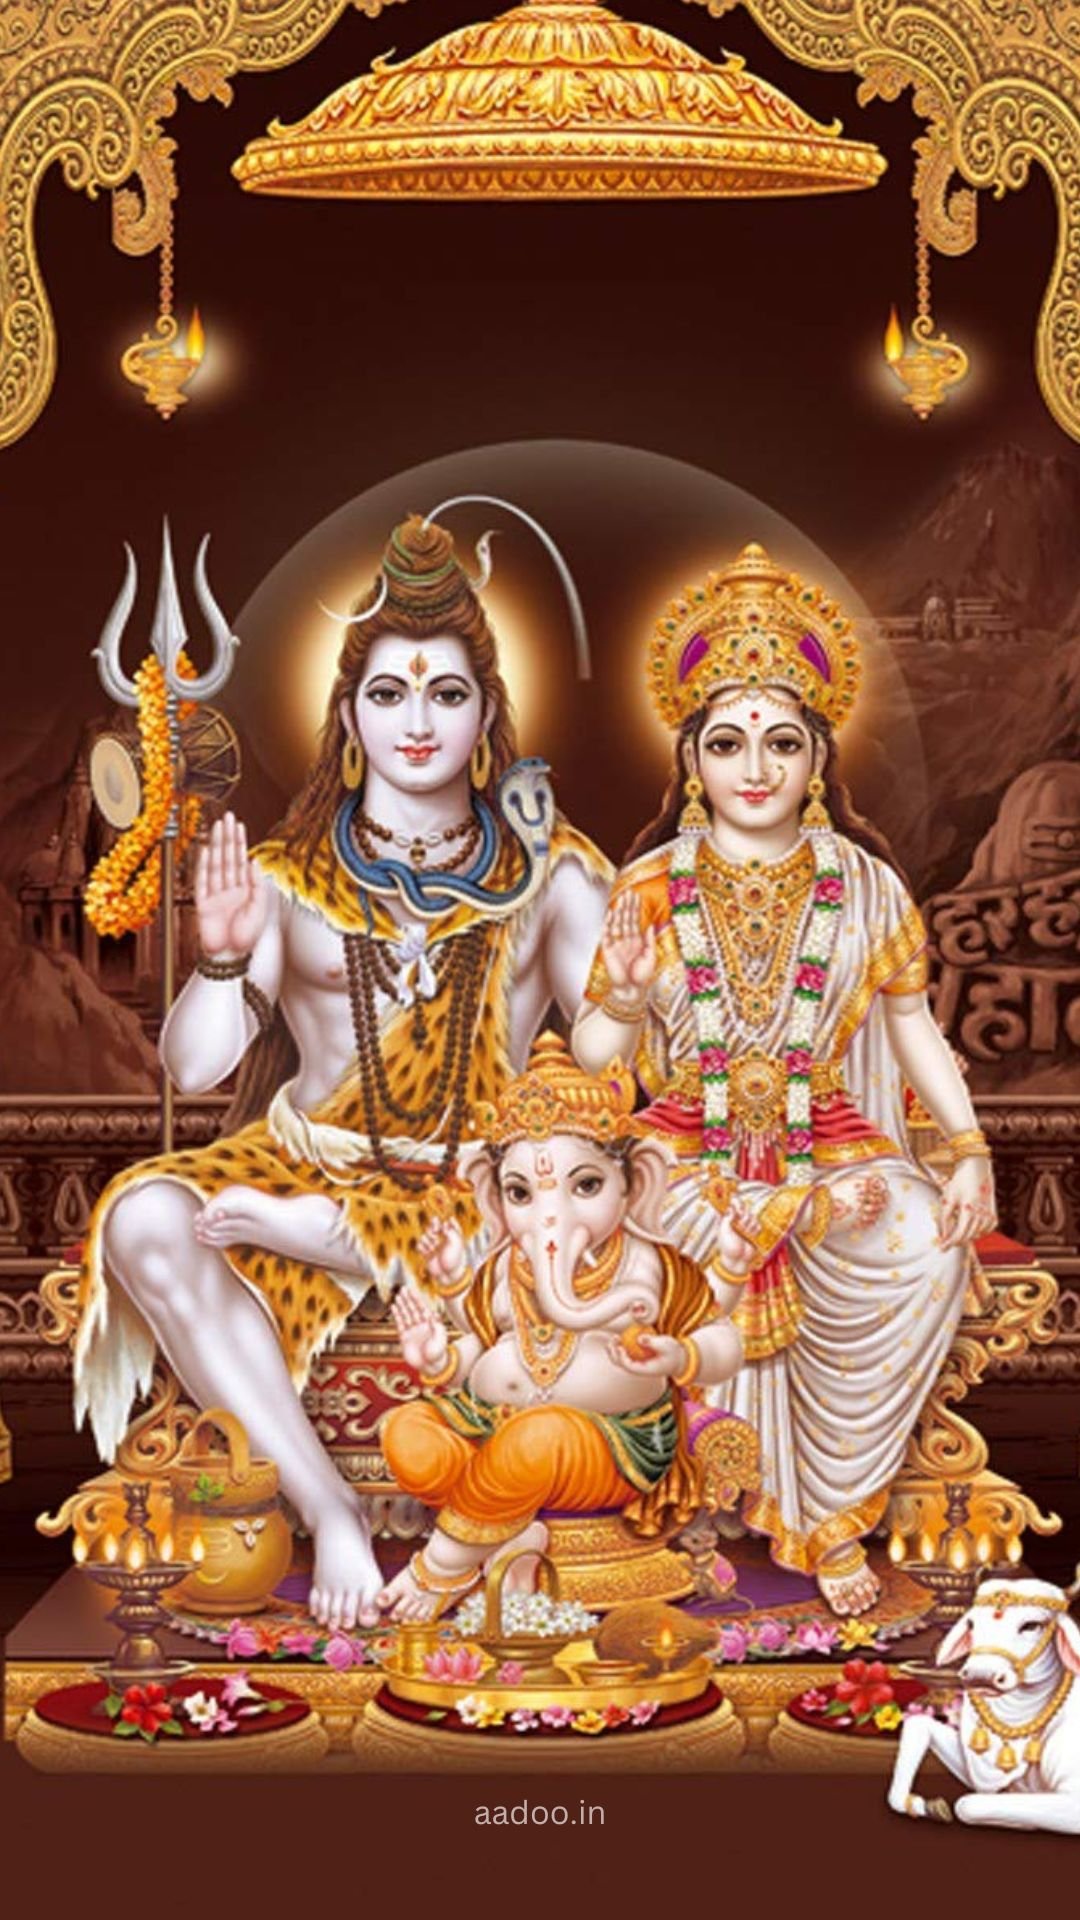 Shiv Parvati Vivah | Consort Images and Wallpapers - Shiv Parvati Wallpapers